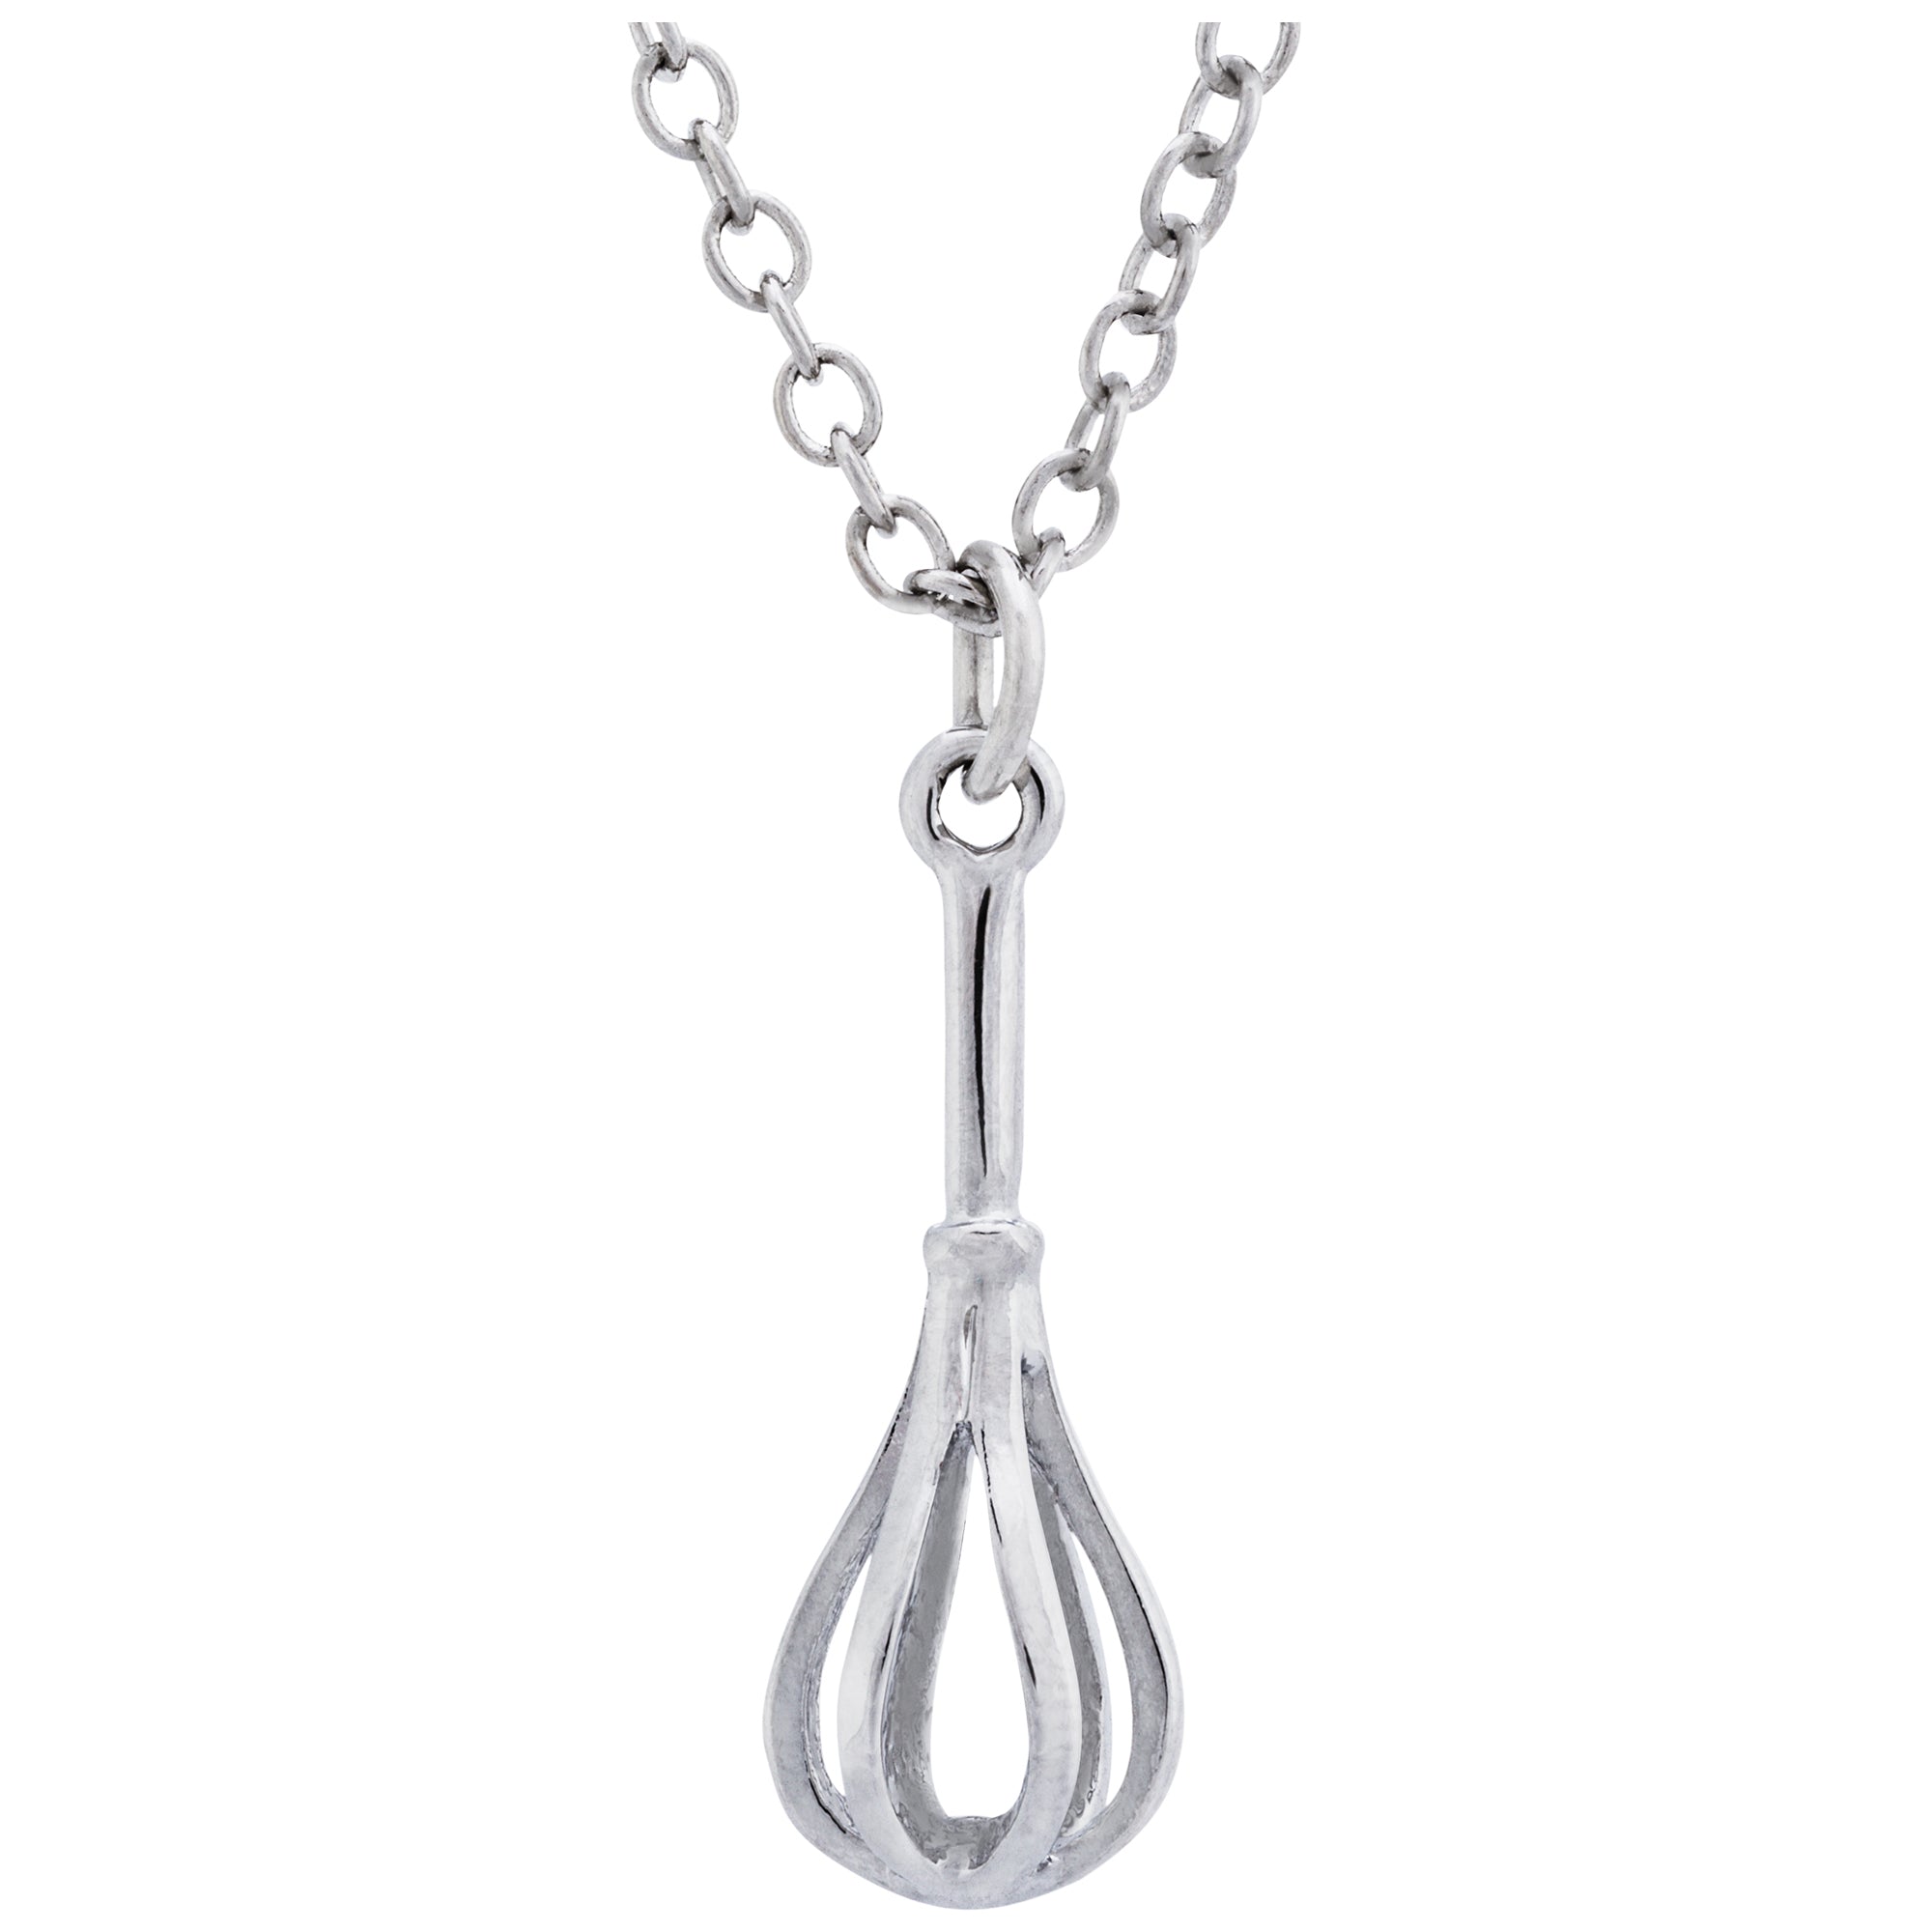 In The Kitchen Necklace - Whisk